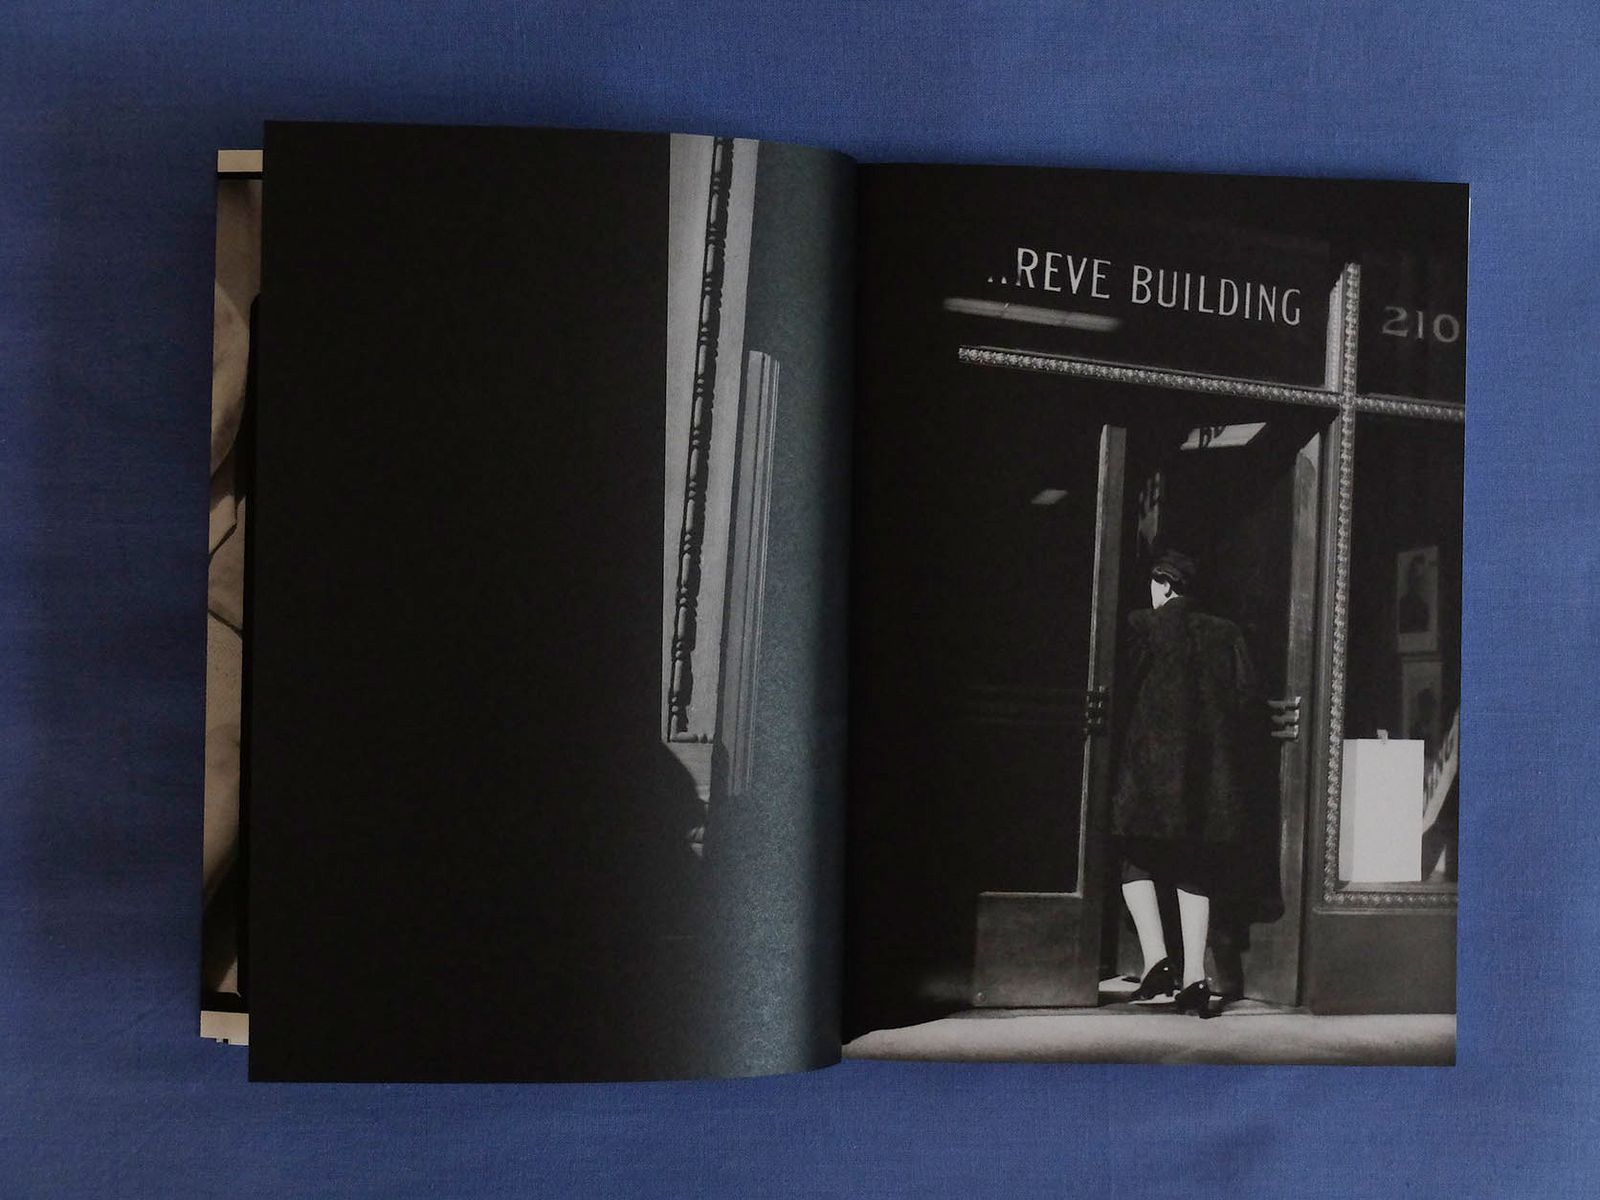 © Leporello Books - Image from the DAY SLEEPER by Sam Contis, Dorethea Lange photography project